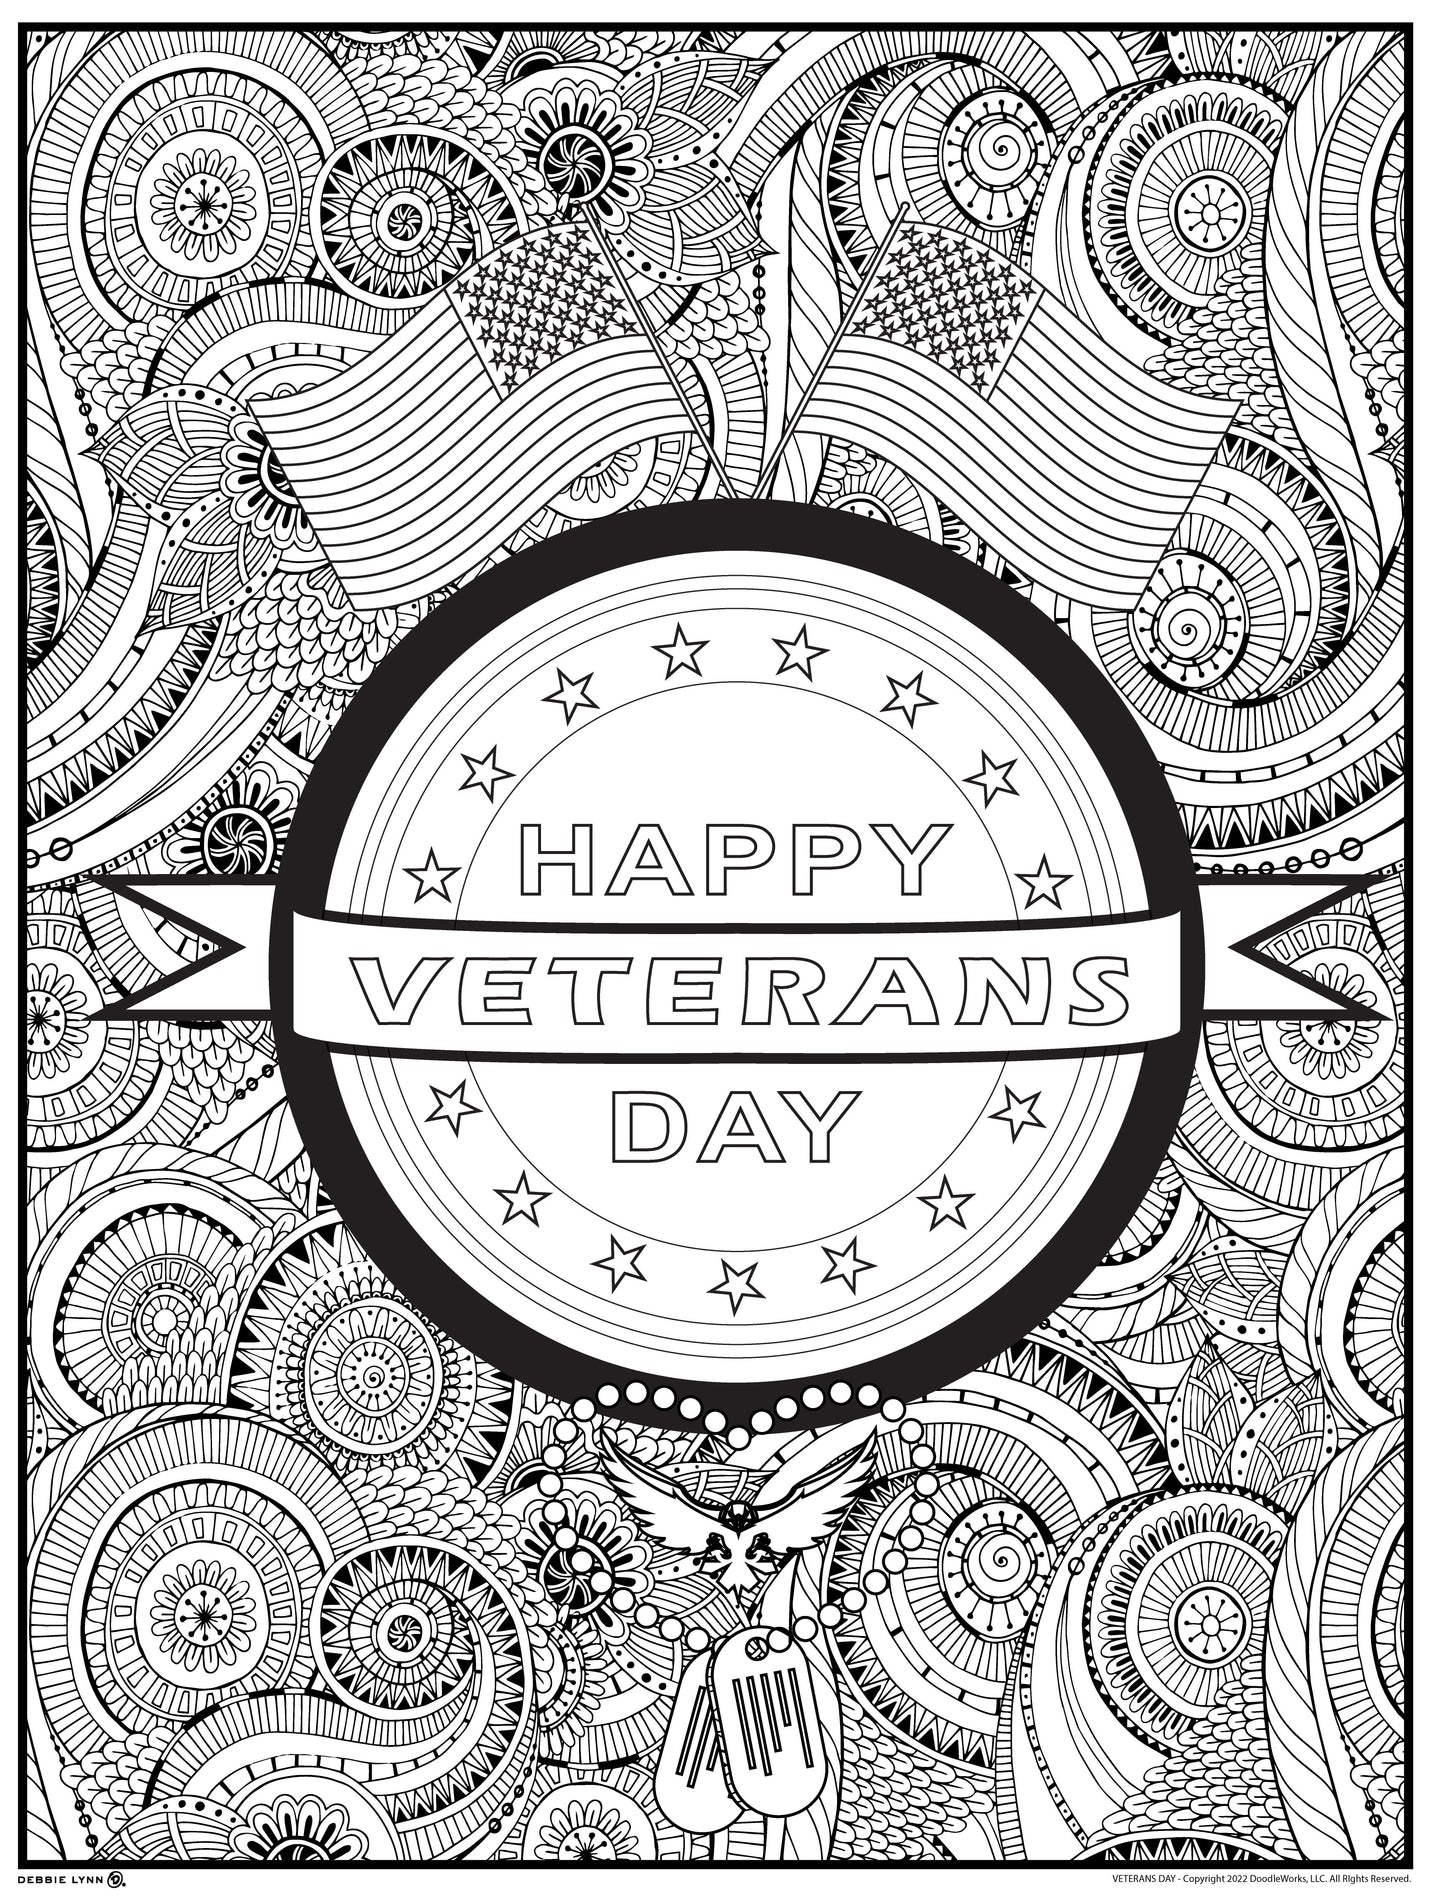 Veterans Day Personalized Giant Coloring Poster 46"x60"